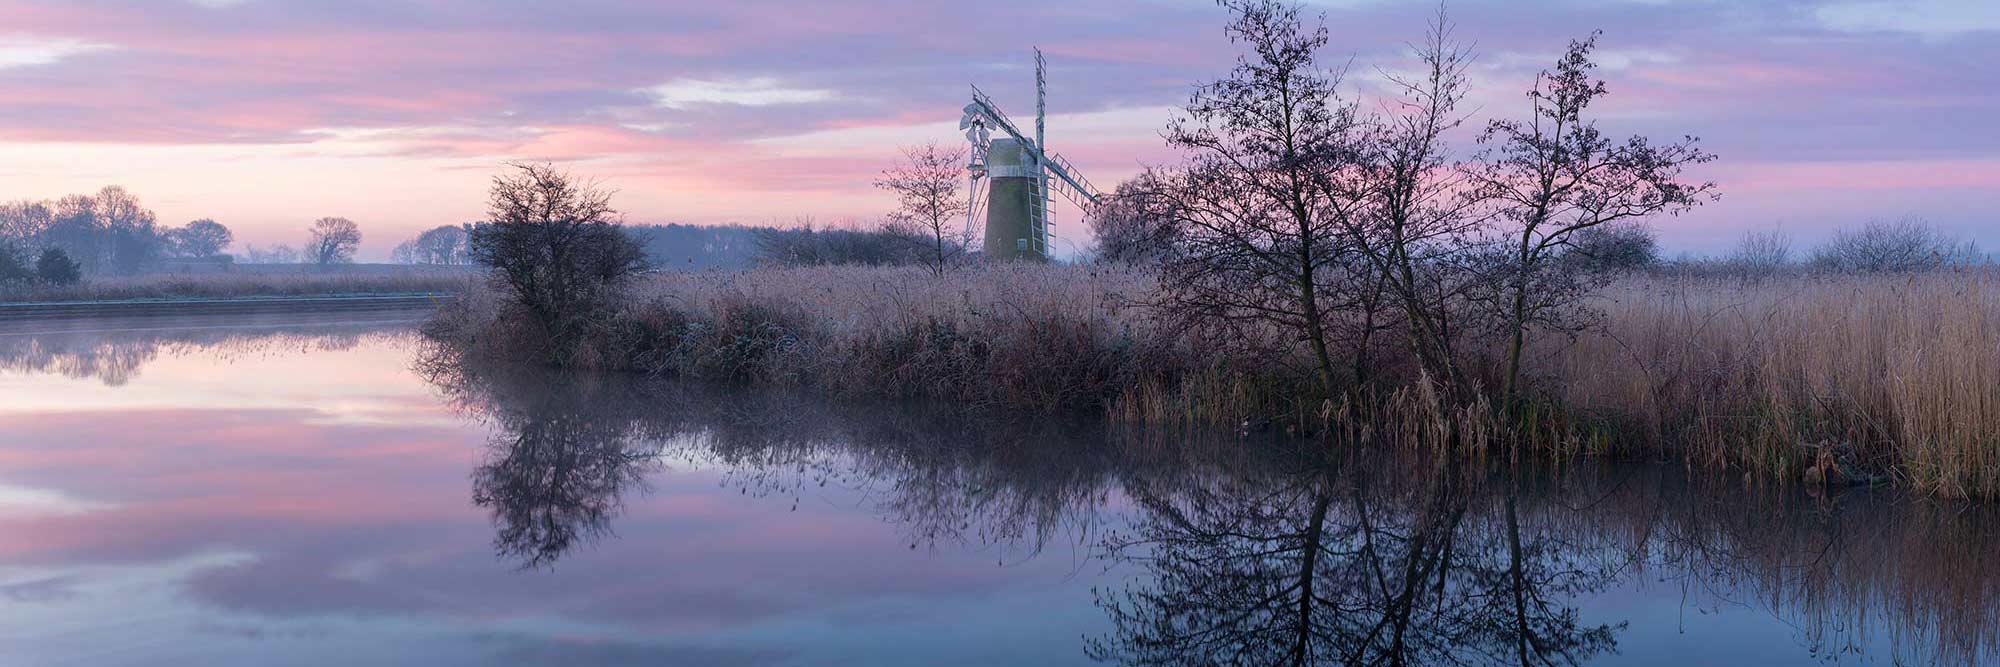 Winter trees and a windmill relected in a lake